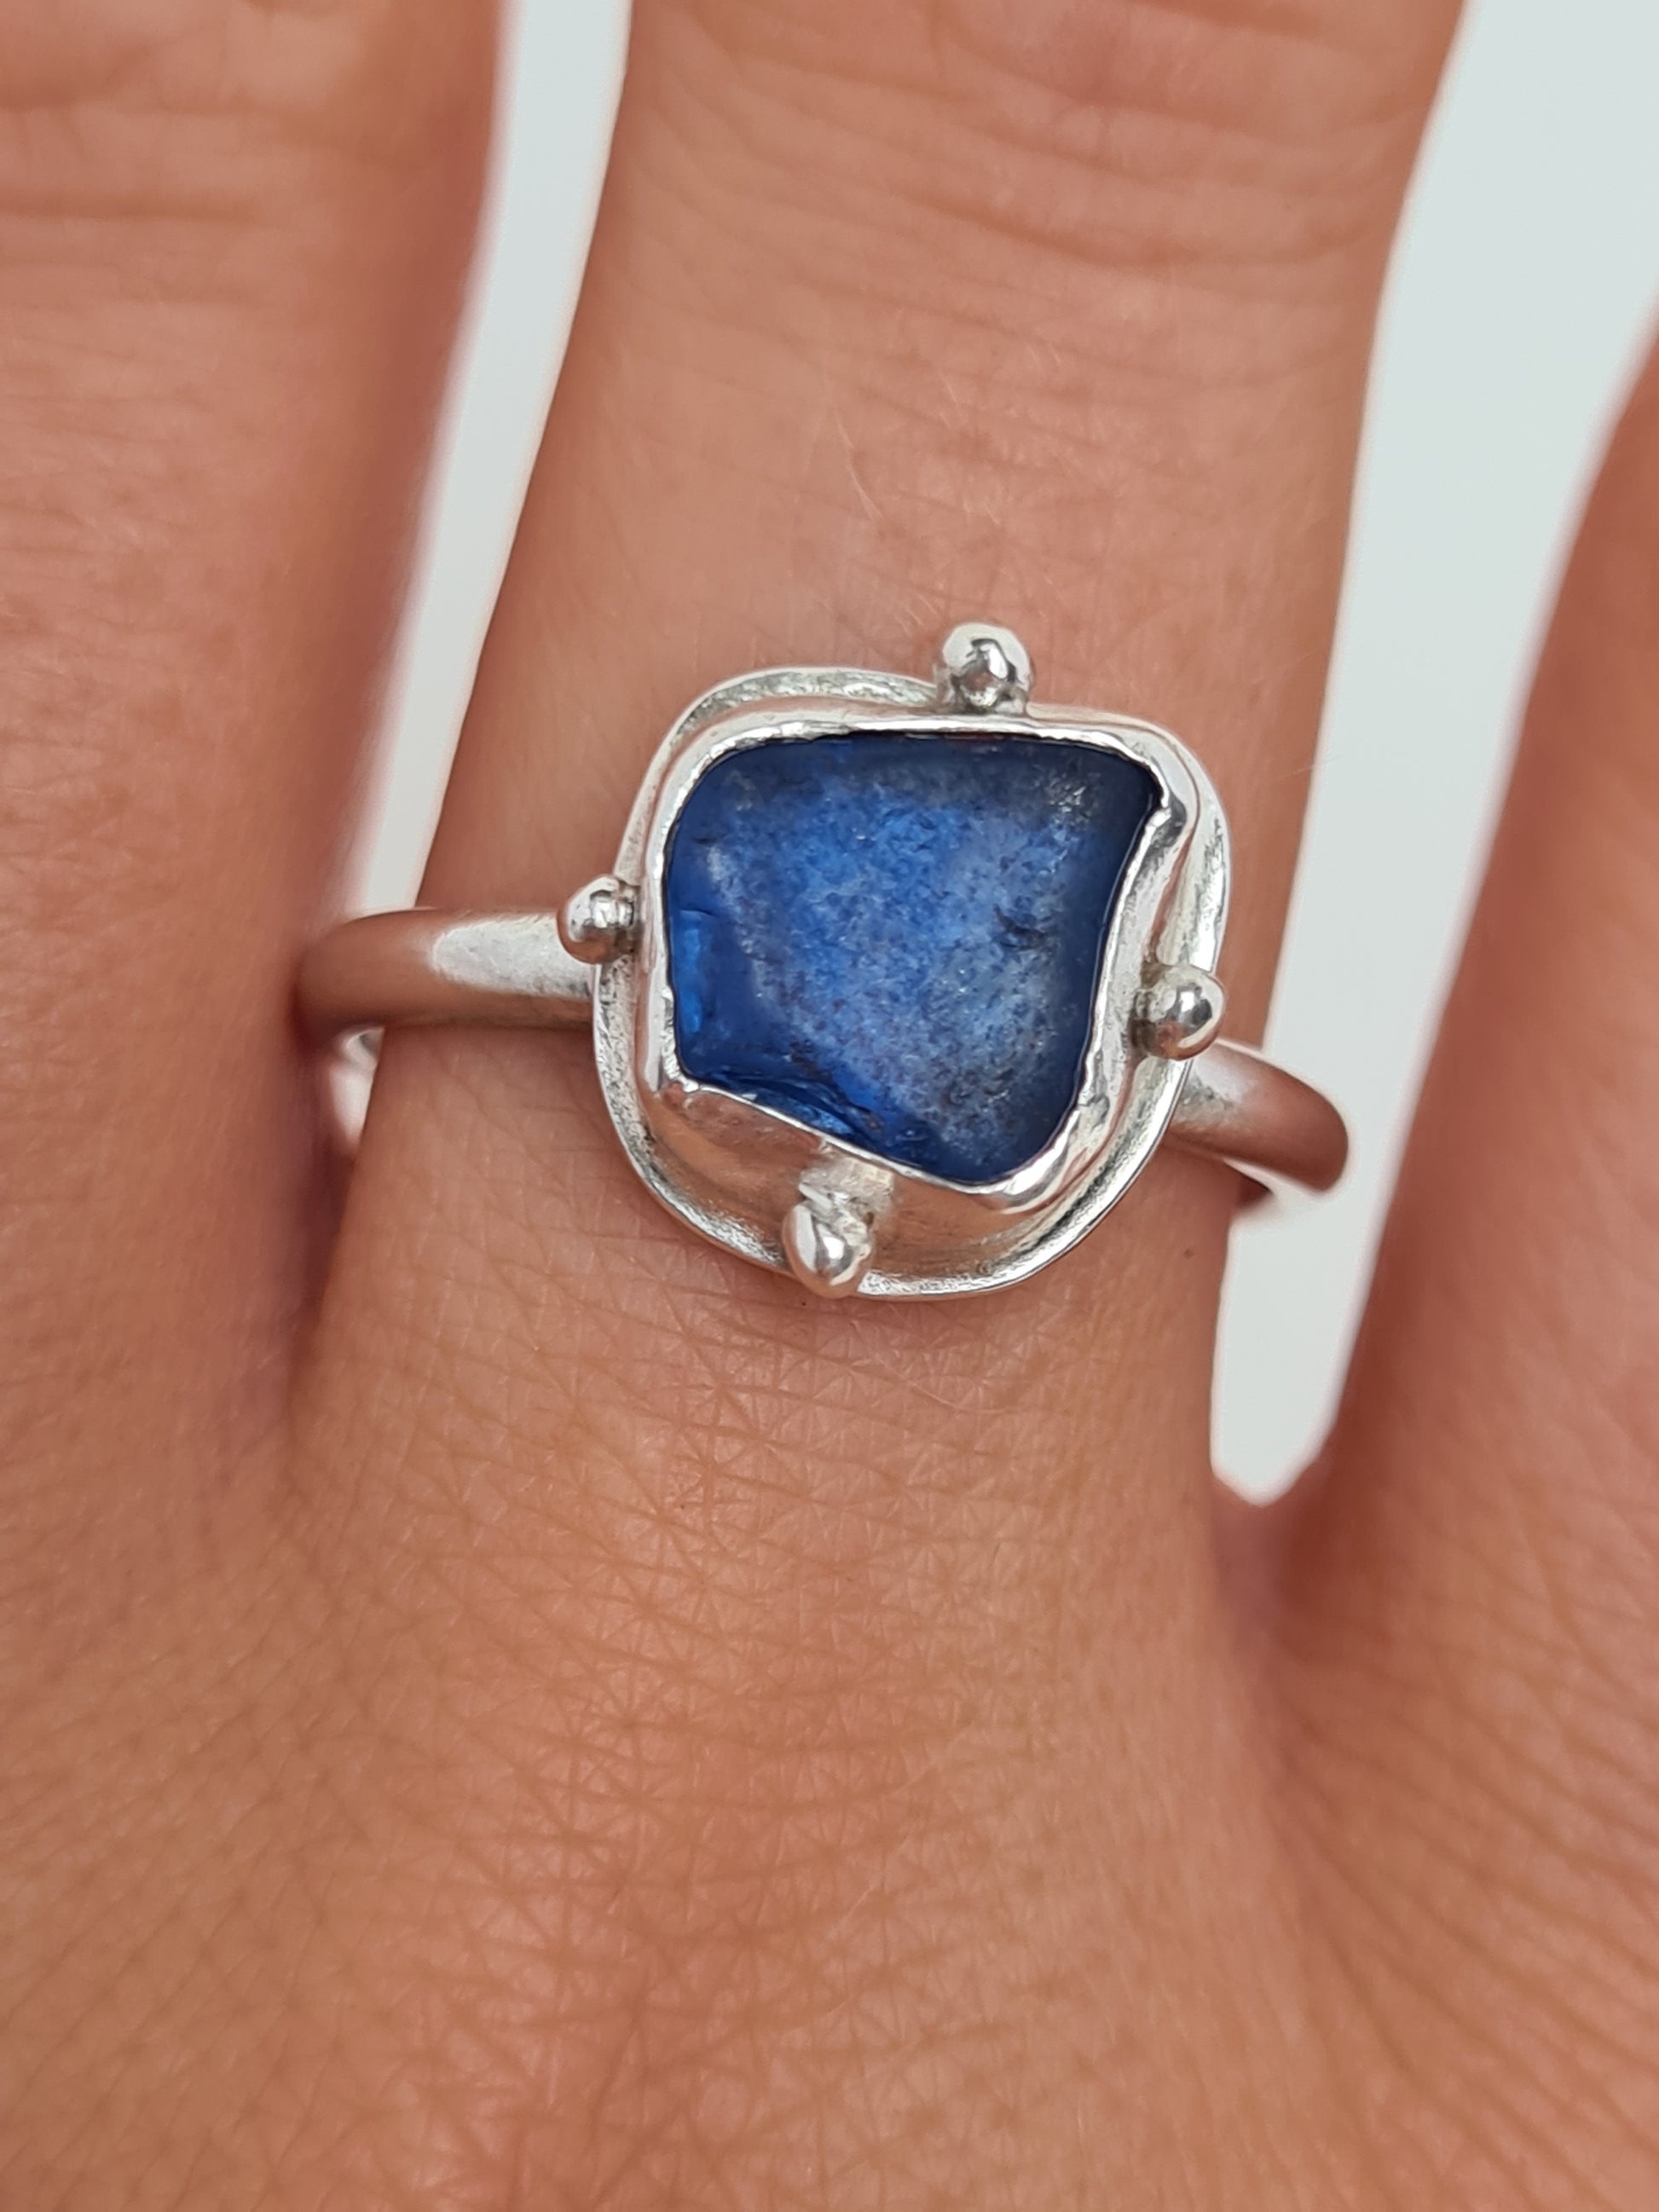 This vibrant royal blue sea gem is nestled in a sterling silver bezel with subtle embellishments and set upon an elegant D shaped band. Crafted with sustainability in mind this silver ring is handmade from 100% recycled silver.